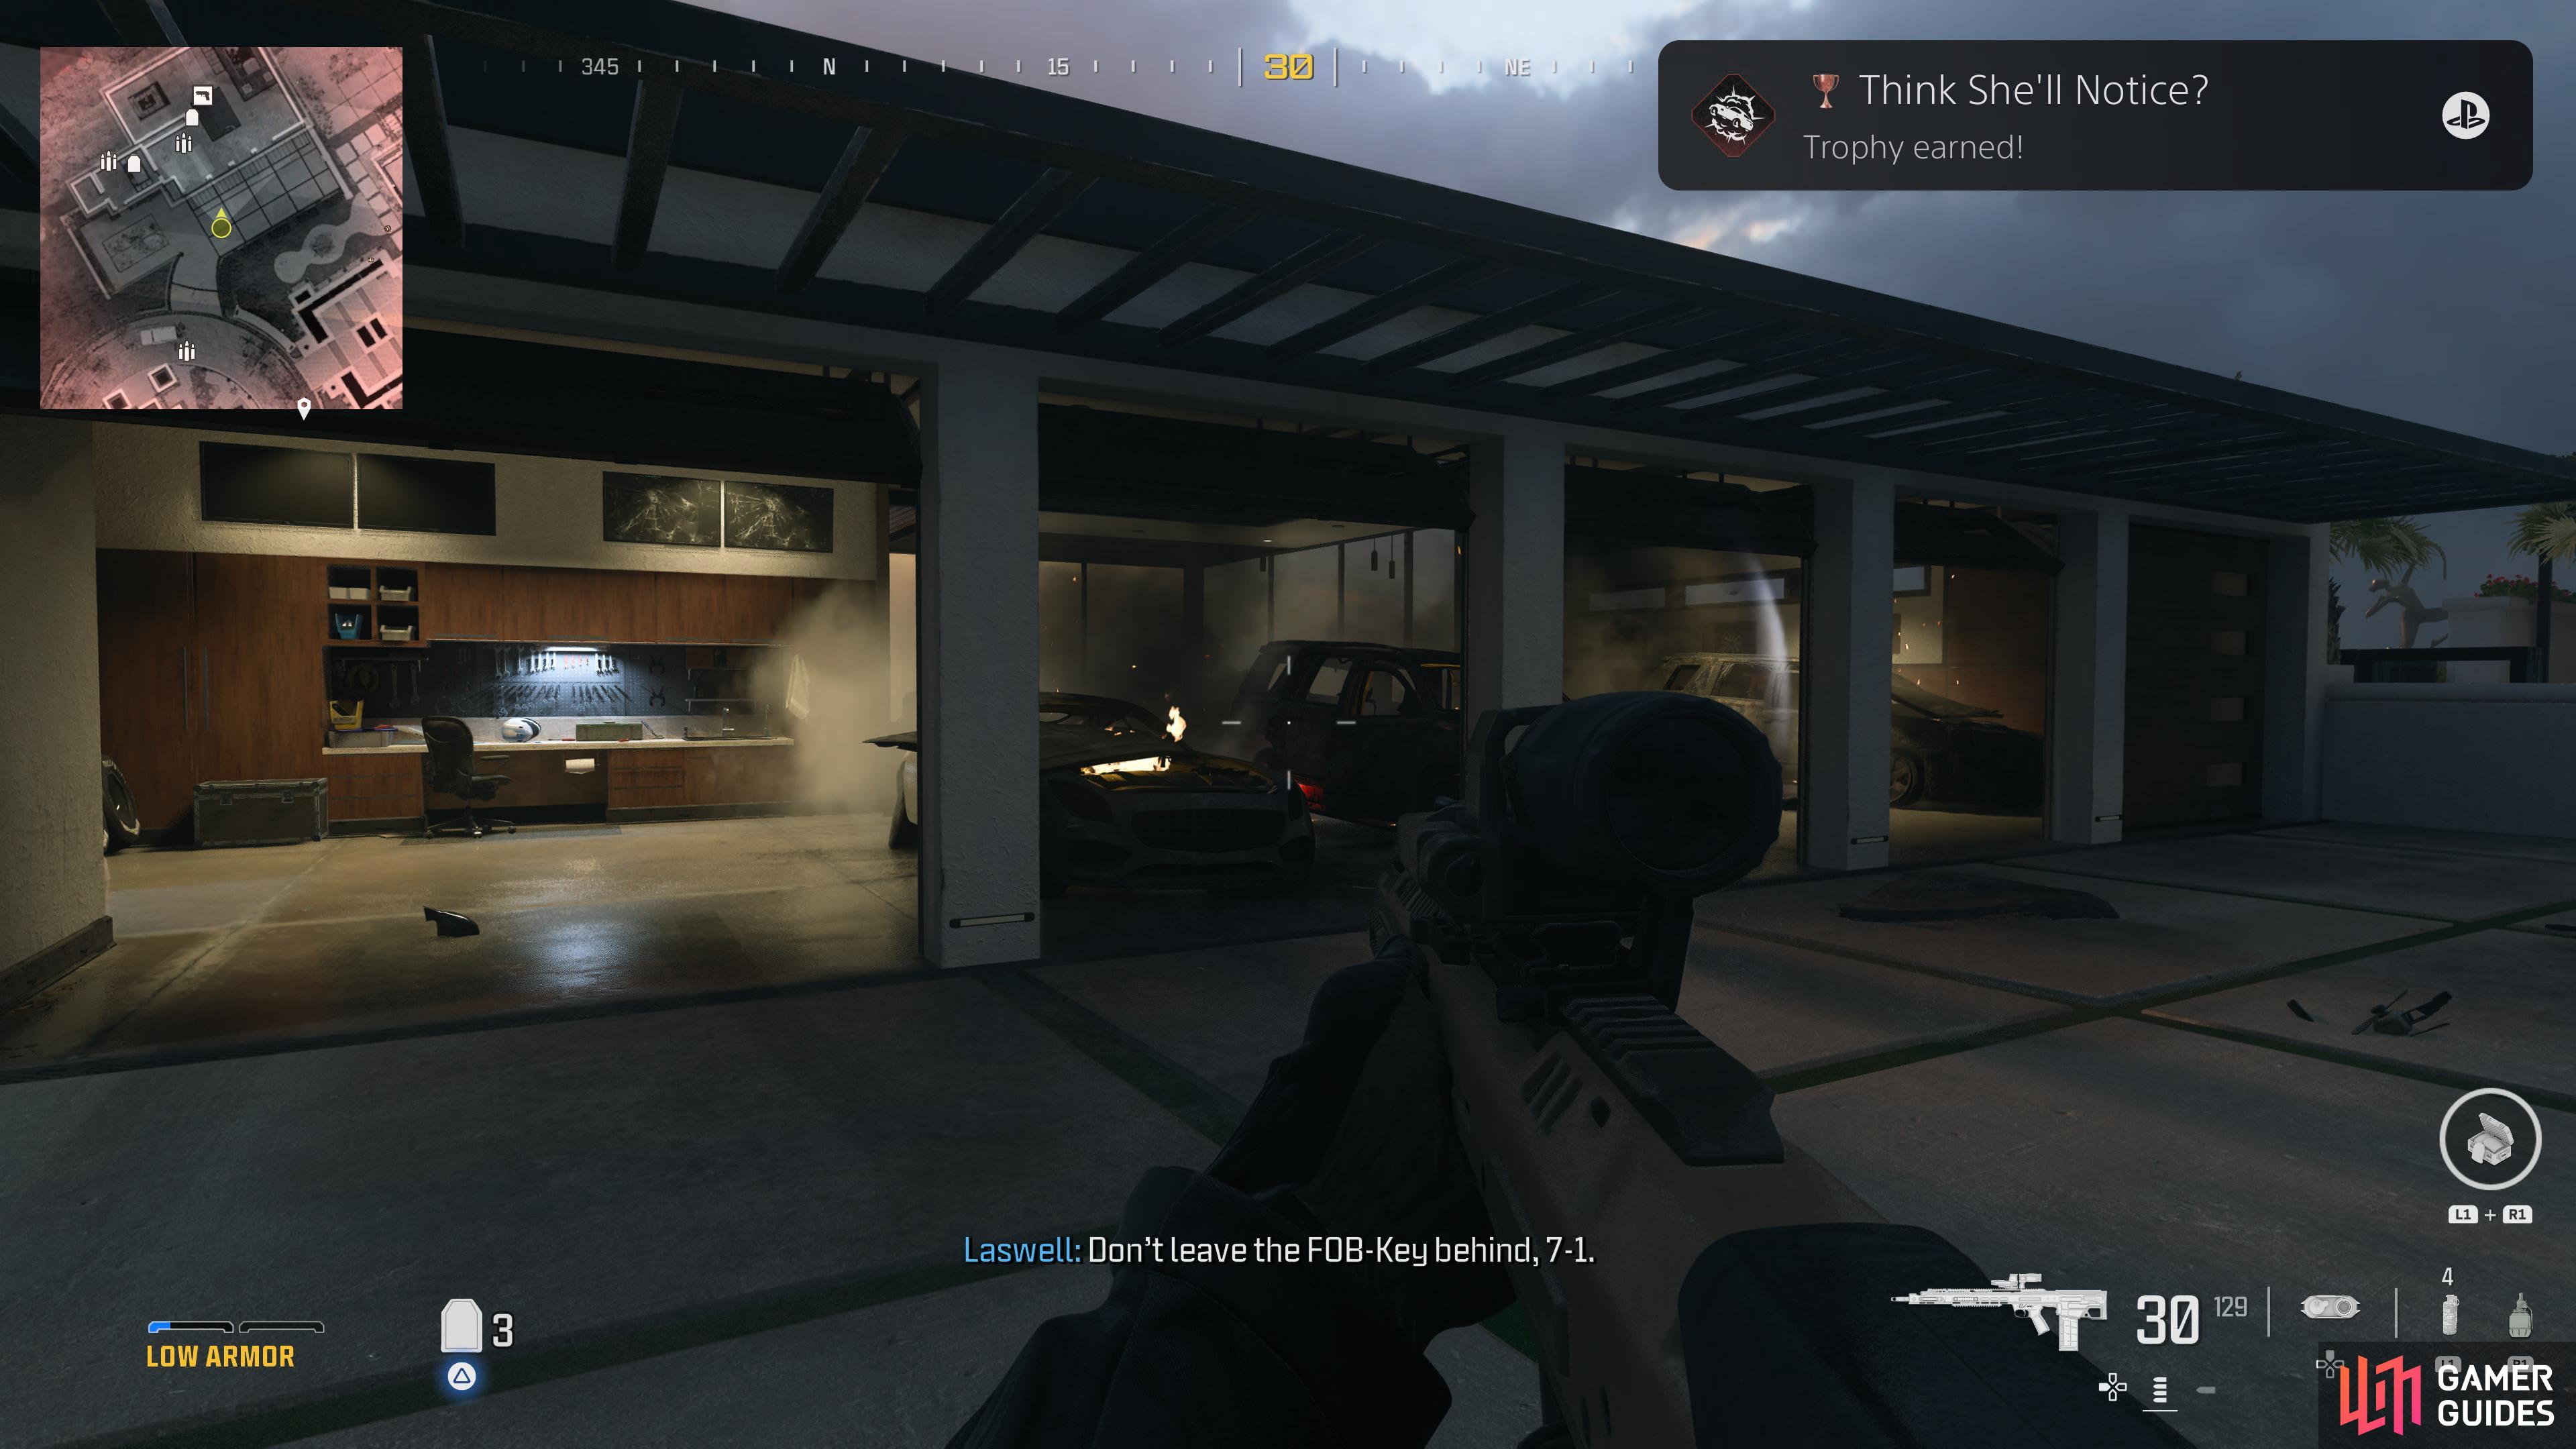 and destroy all the vehicles inside the garage to unlock the trophy/achievement.